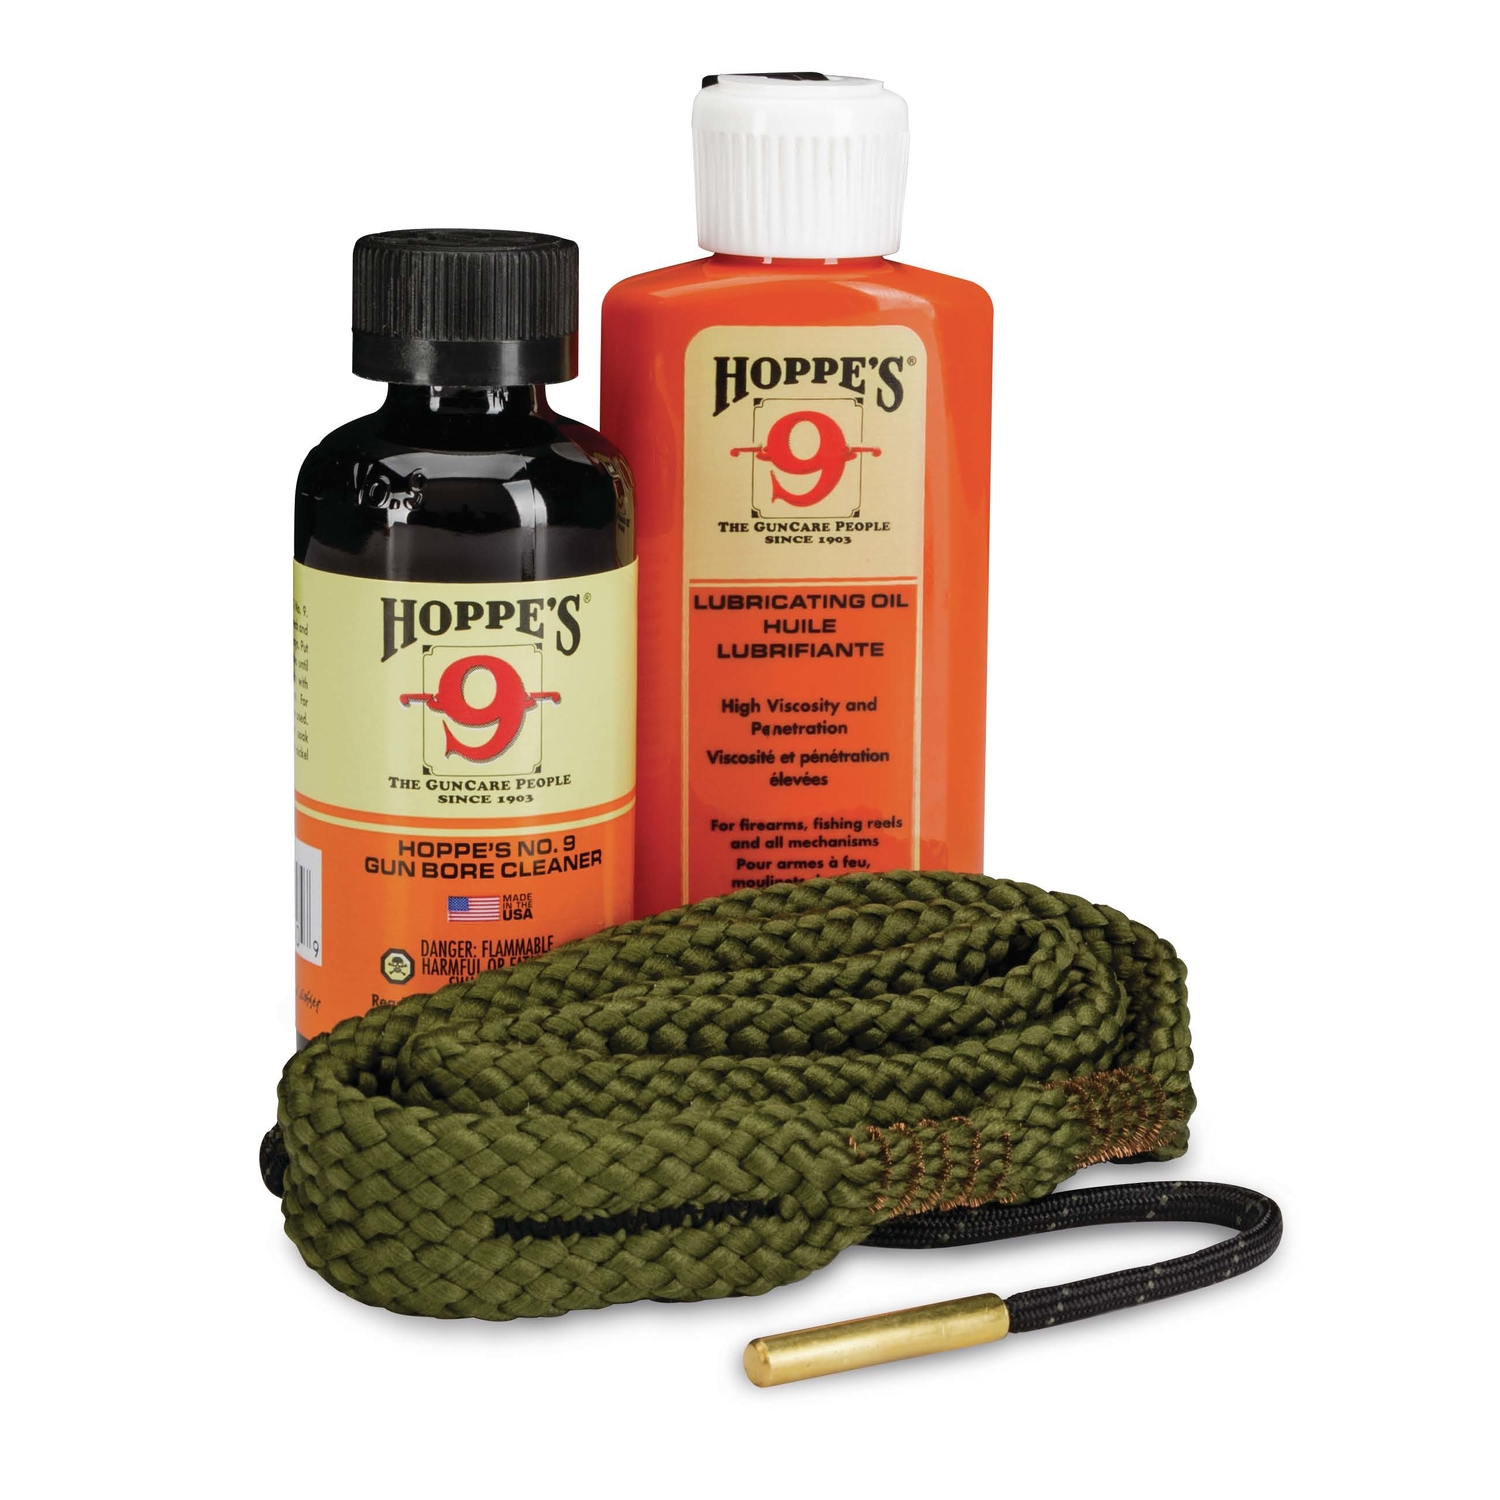 Photos - Other sporting goods Hoppes Hoppe's No. 9 Rifle Gun Cleaning Kit 3 pc 110556 